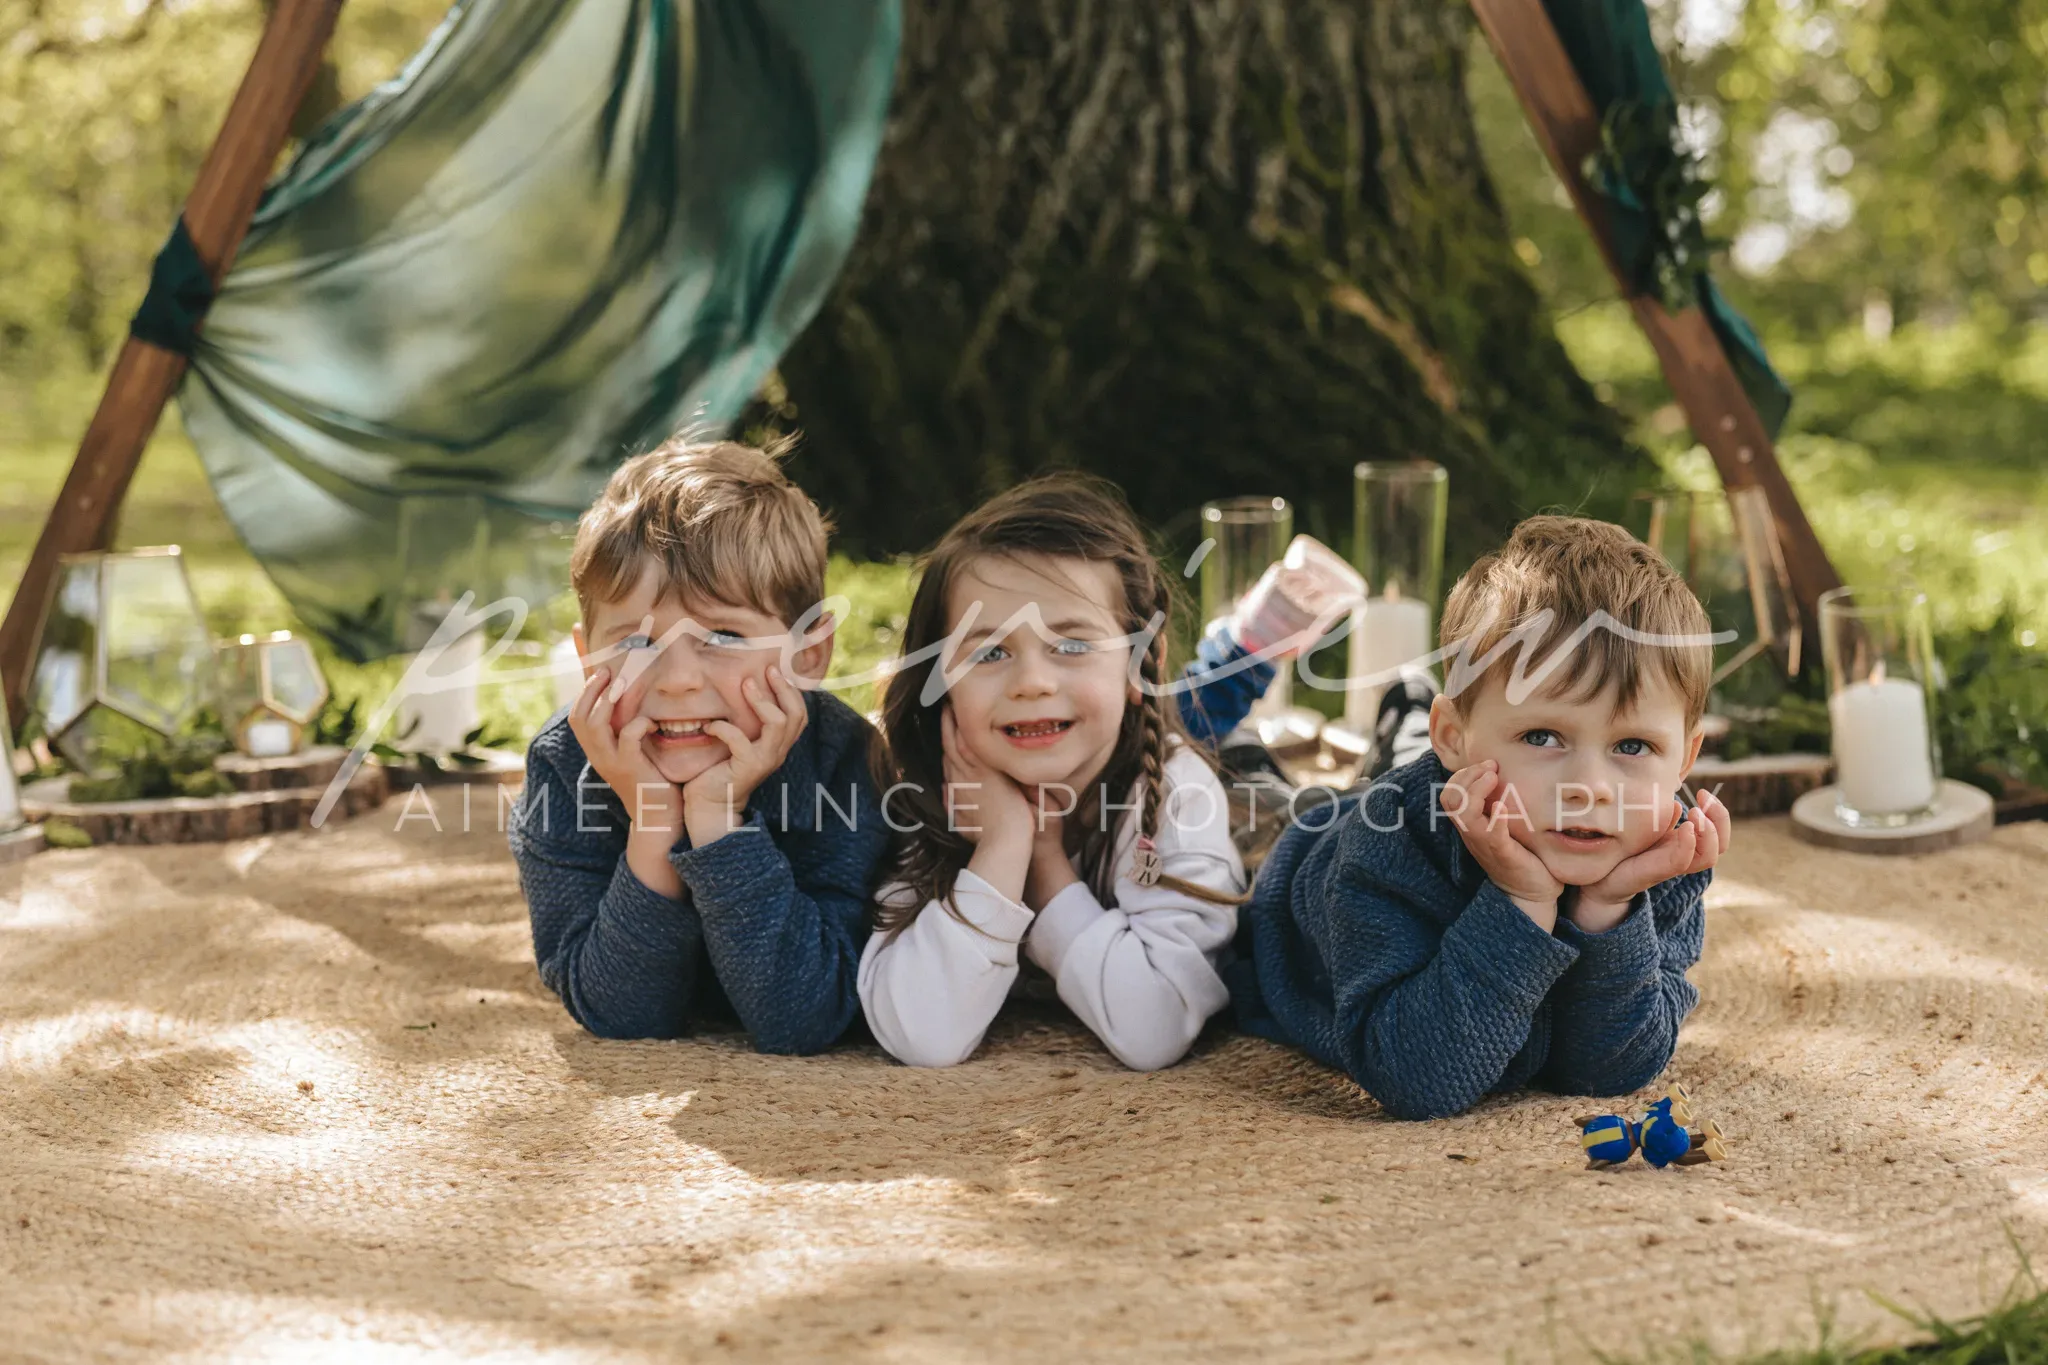 Three children lie on their stomachs under a hammock in a sunny park, with a picnic setup around them. they smile at the camera, resting their chins on their hands. the setting is serene and lush with greenery.